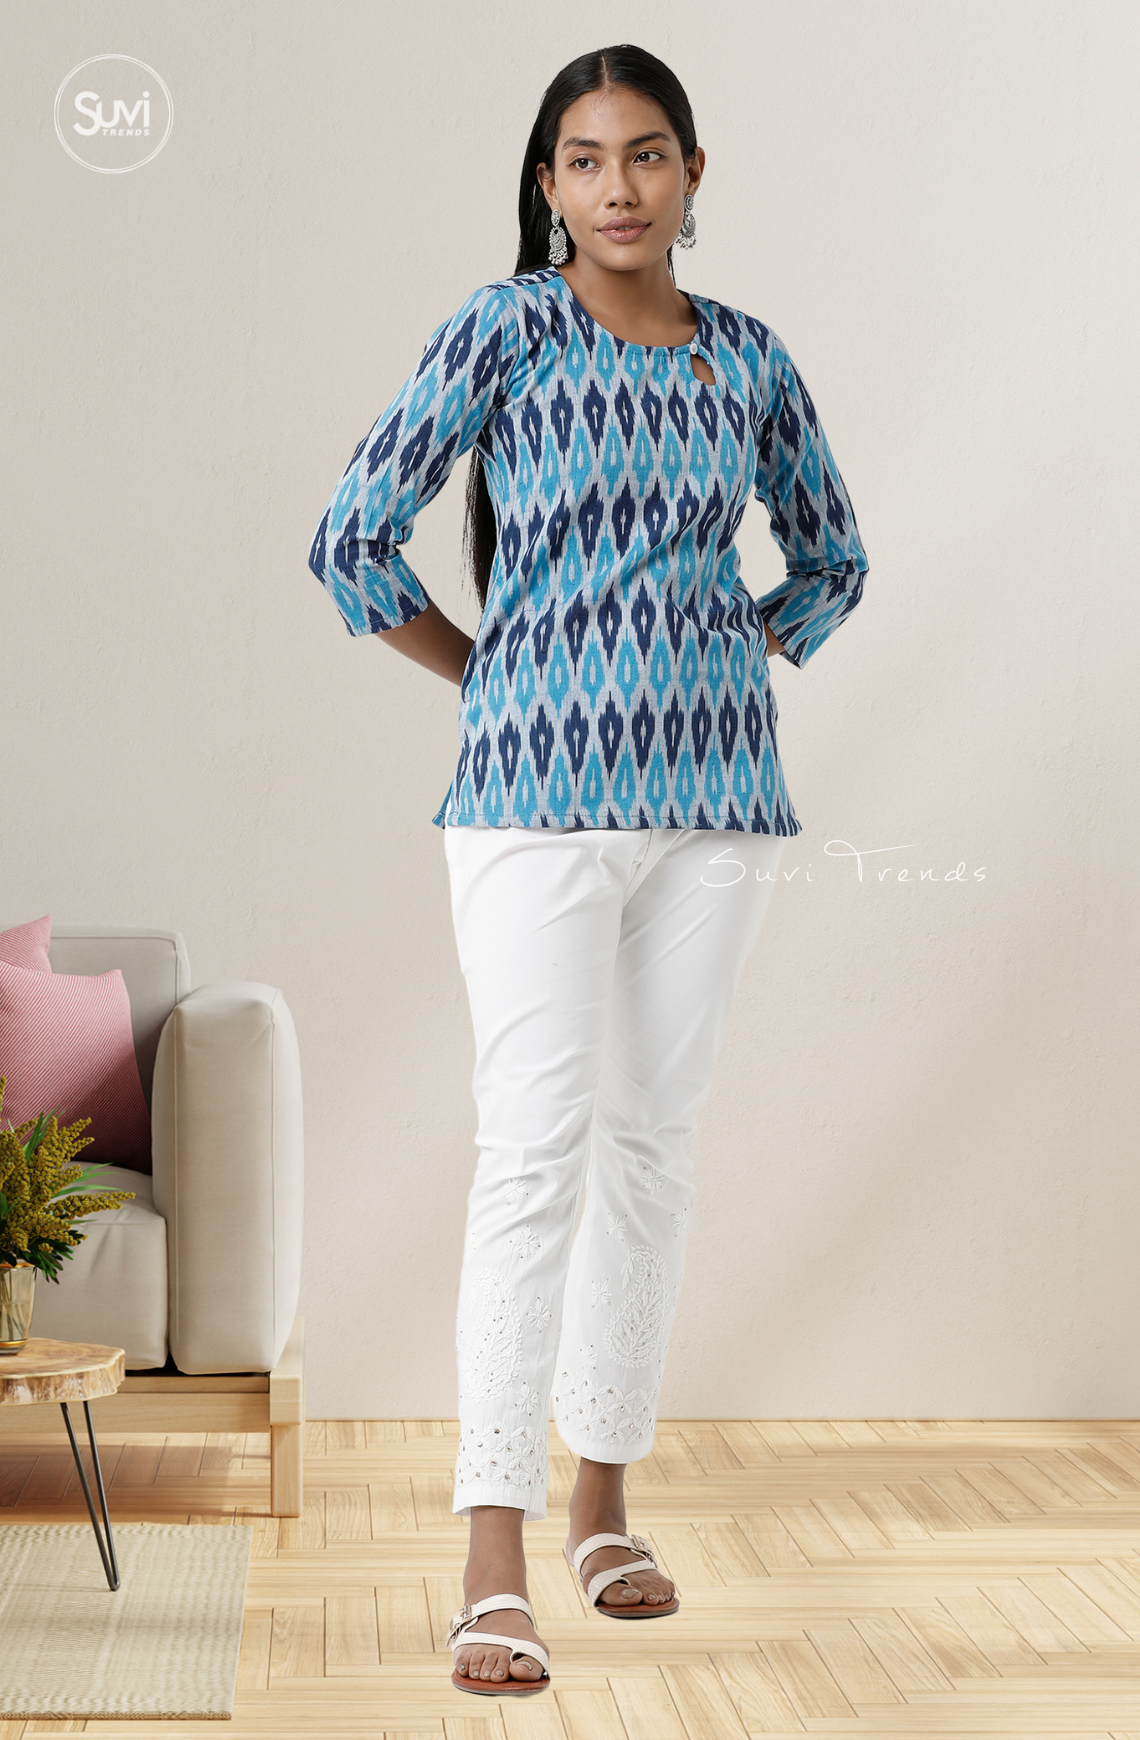 Torquoise Ikat Top with Keyhole Neck